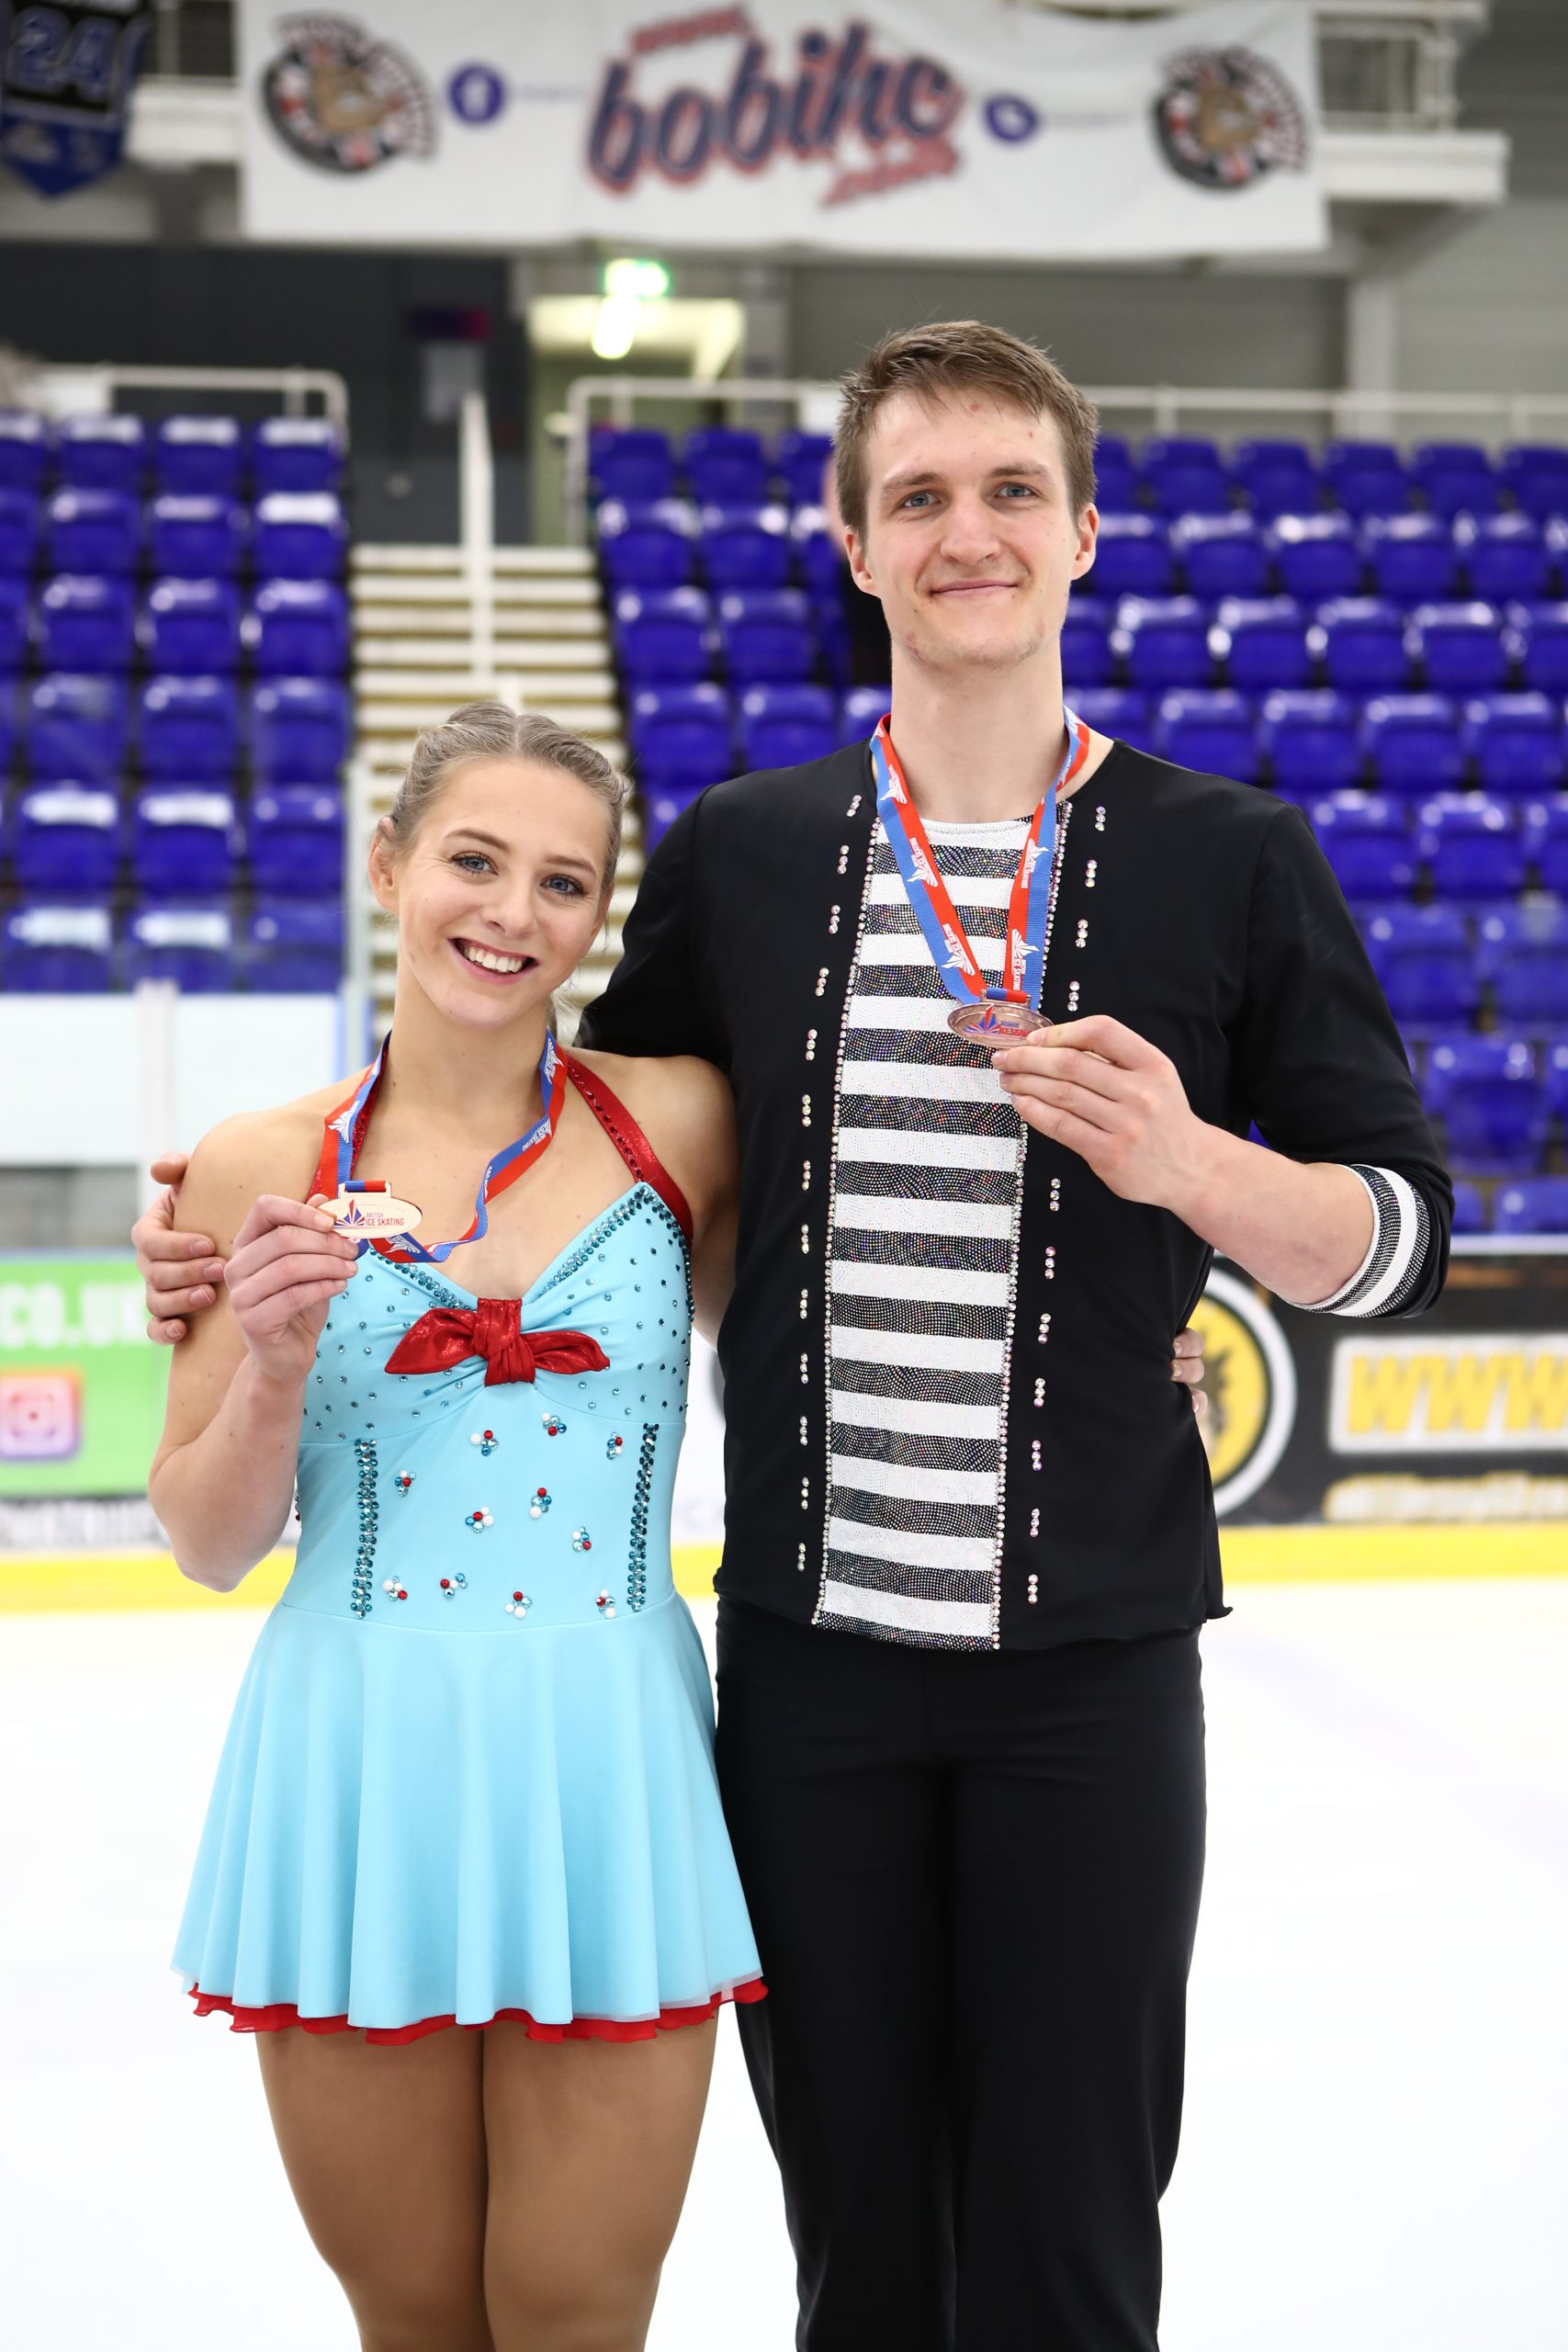 Harry Mattick and Lydia Smart holding their national championship medals.